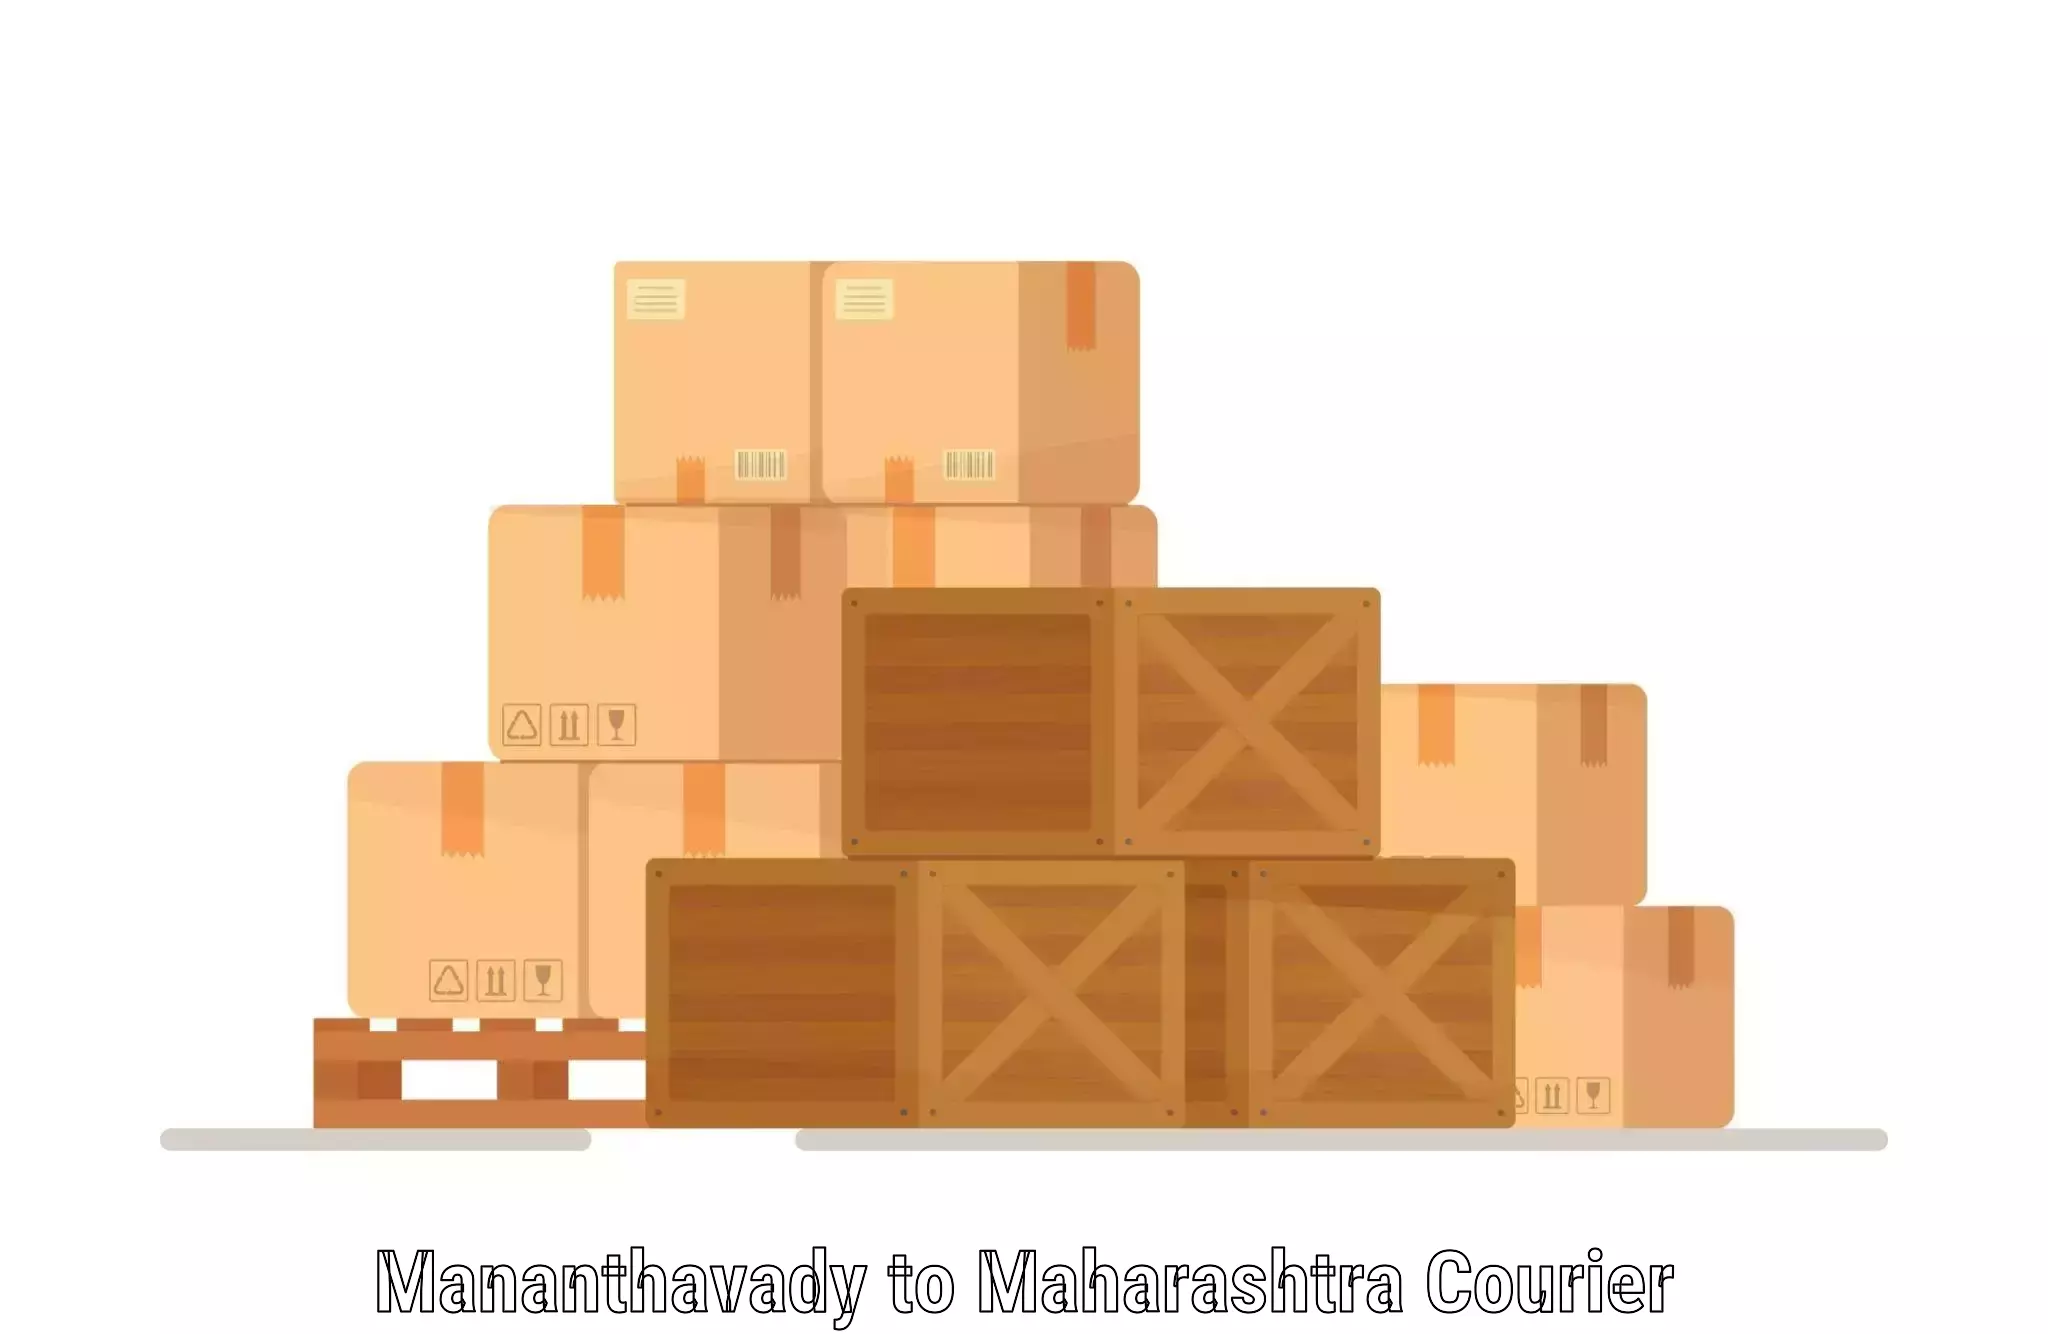 International courier networks Mananthavady to Chandrapur